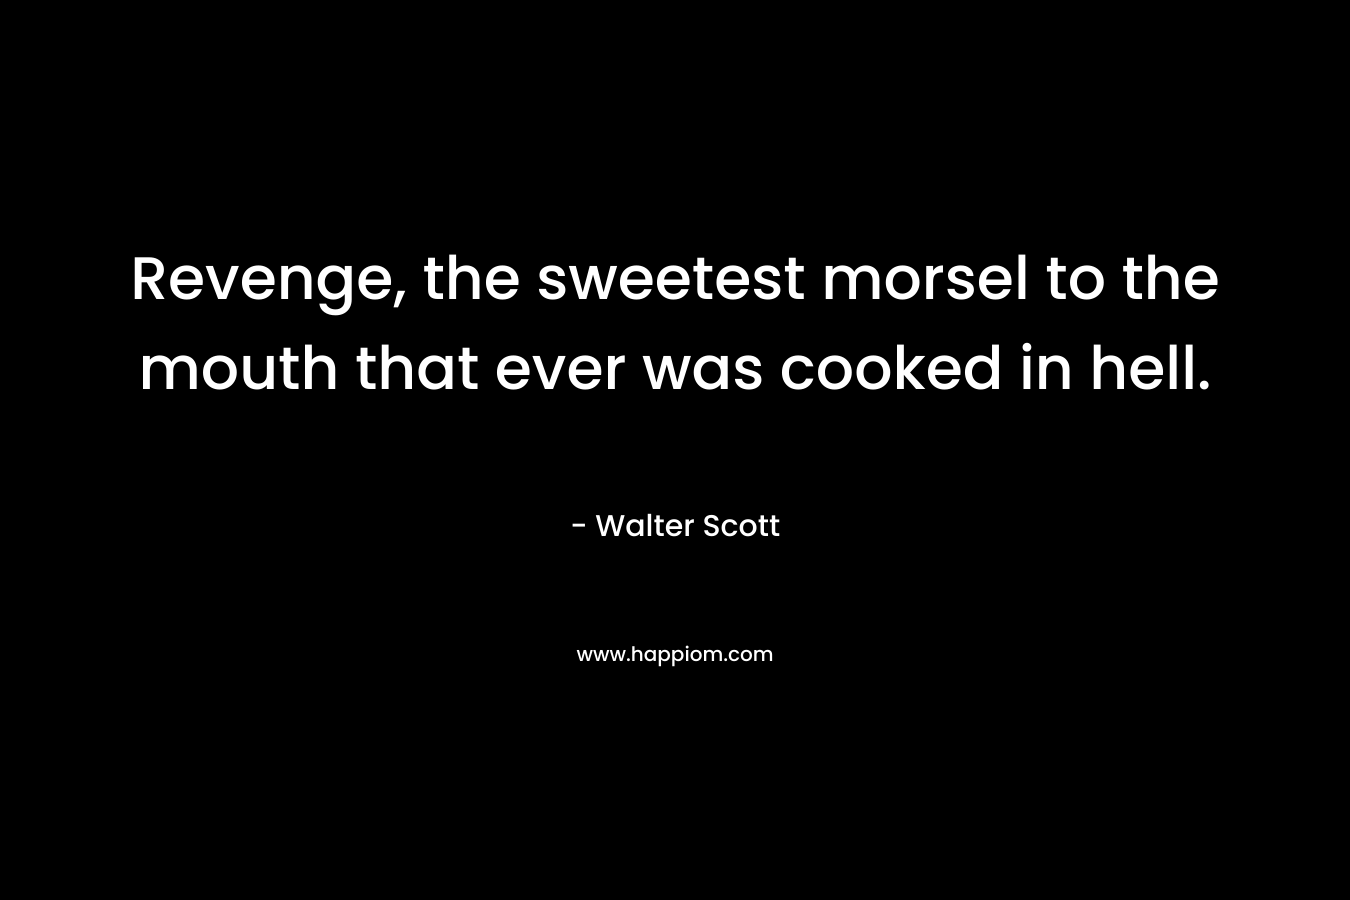 Revenge, the sweetest morsel to the mouth that ever was cooked in hell. – Walter Scott